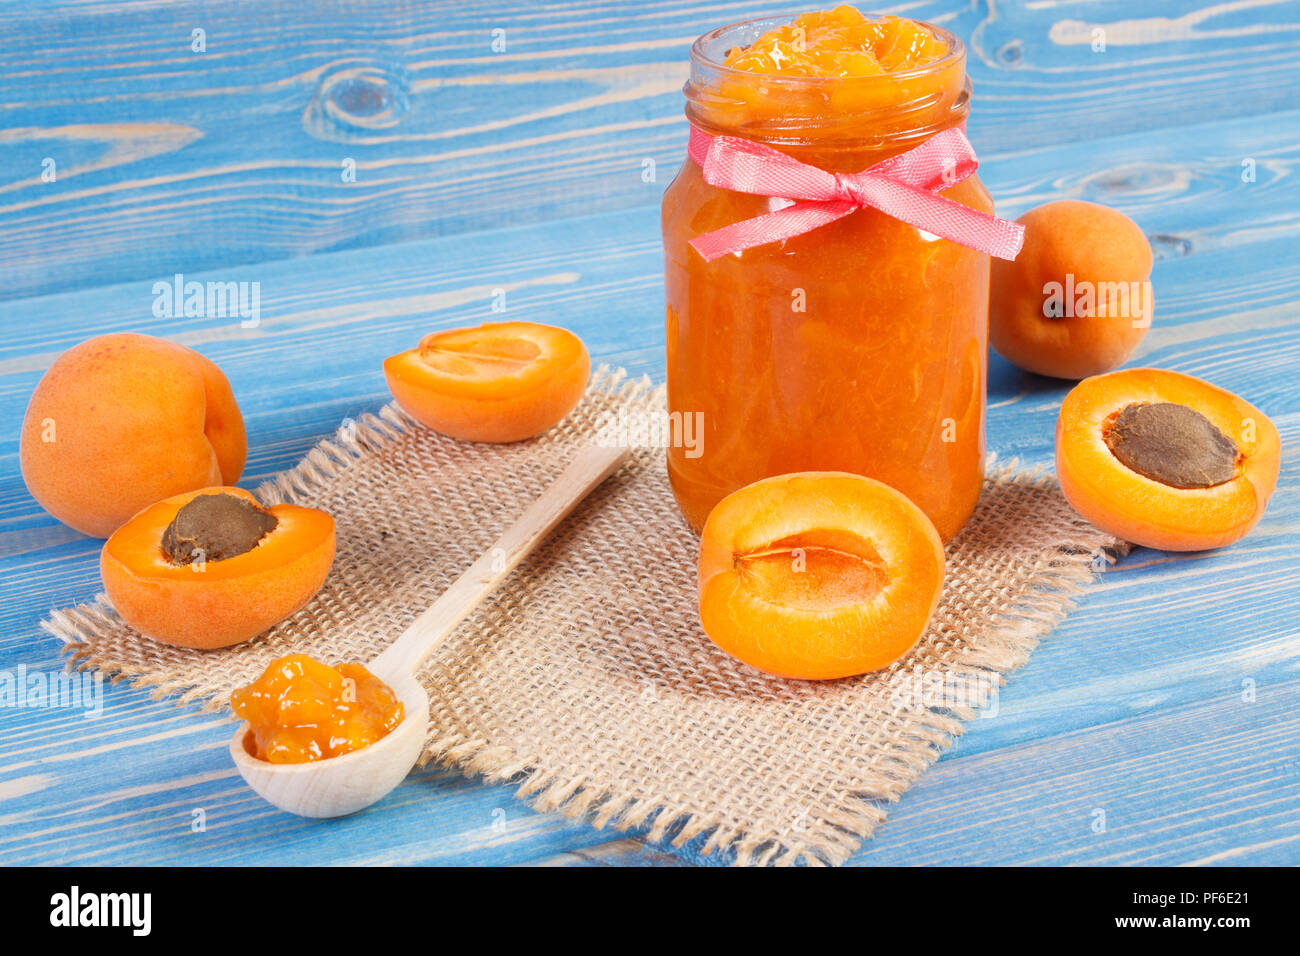 Apricot jam or marmalade in glass jar and ripe fruits on blue boards, concept of healthy sweet dessert Stock Photo